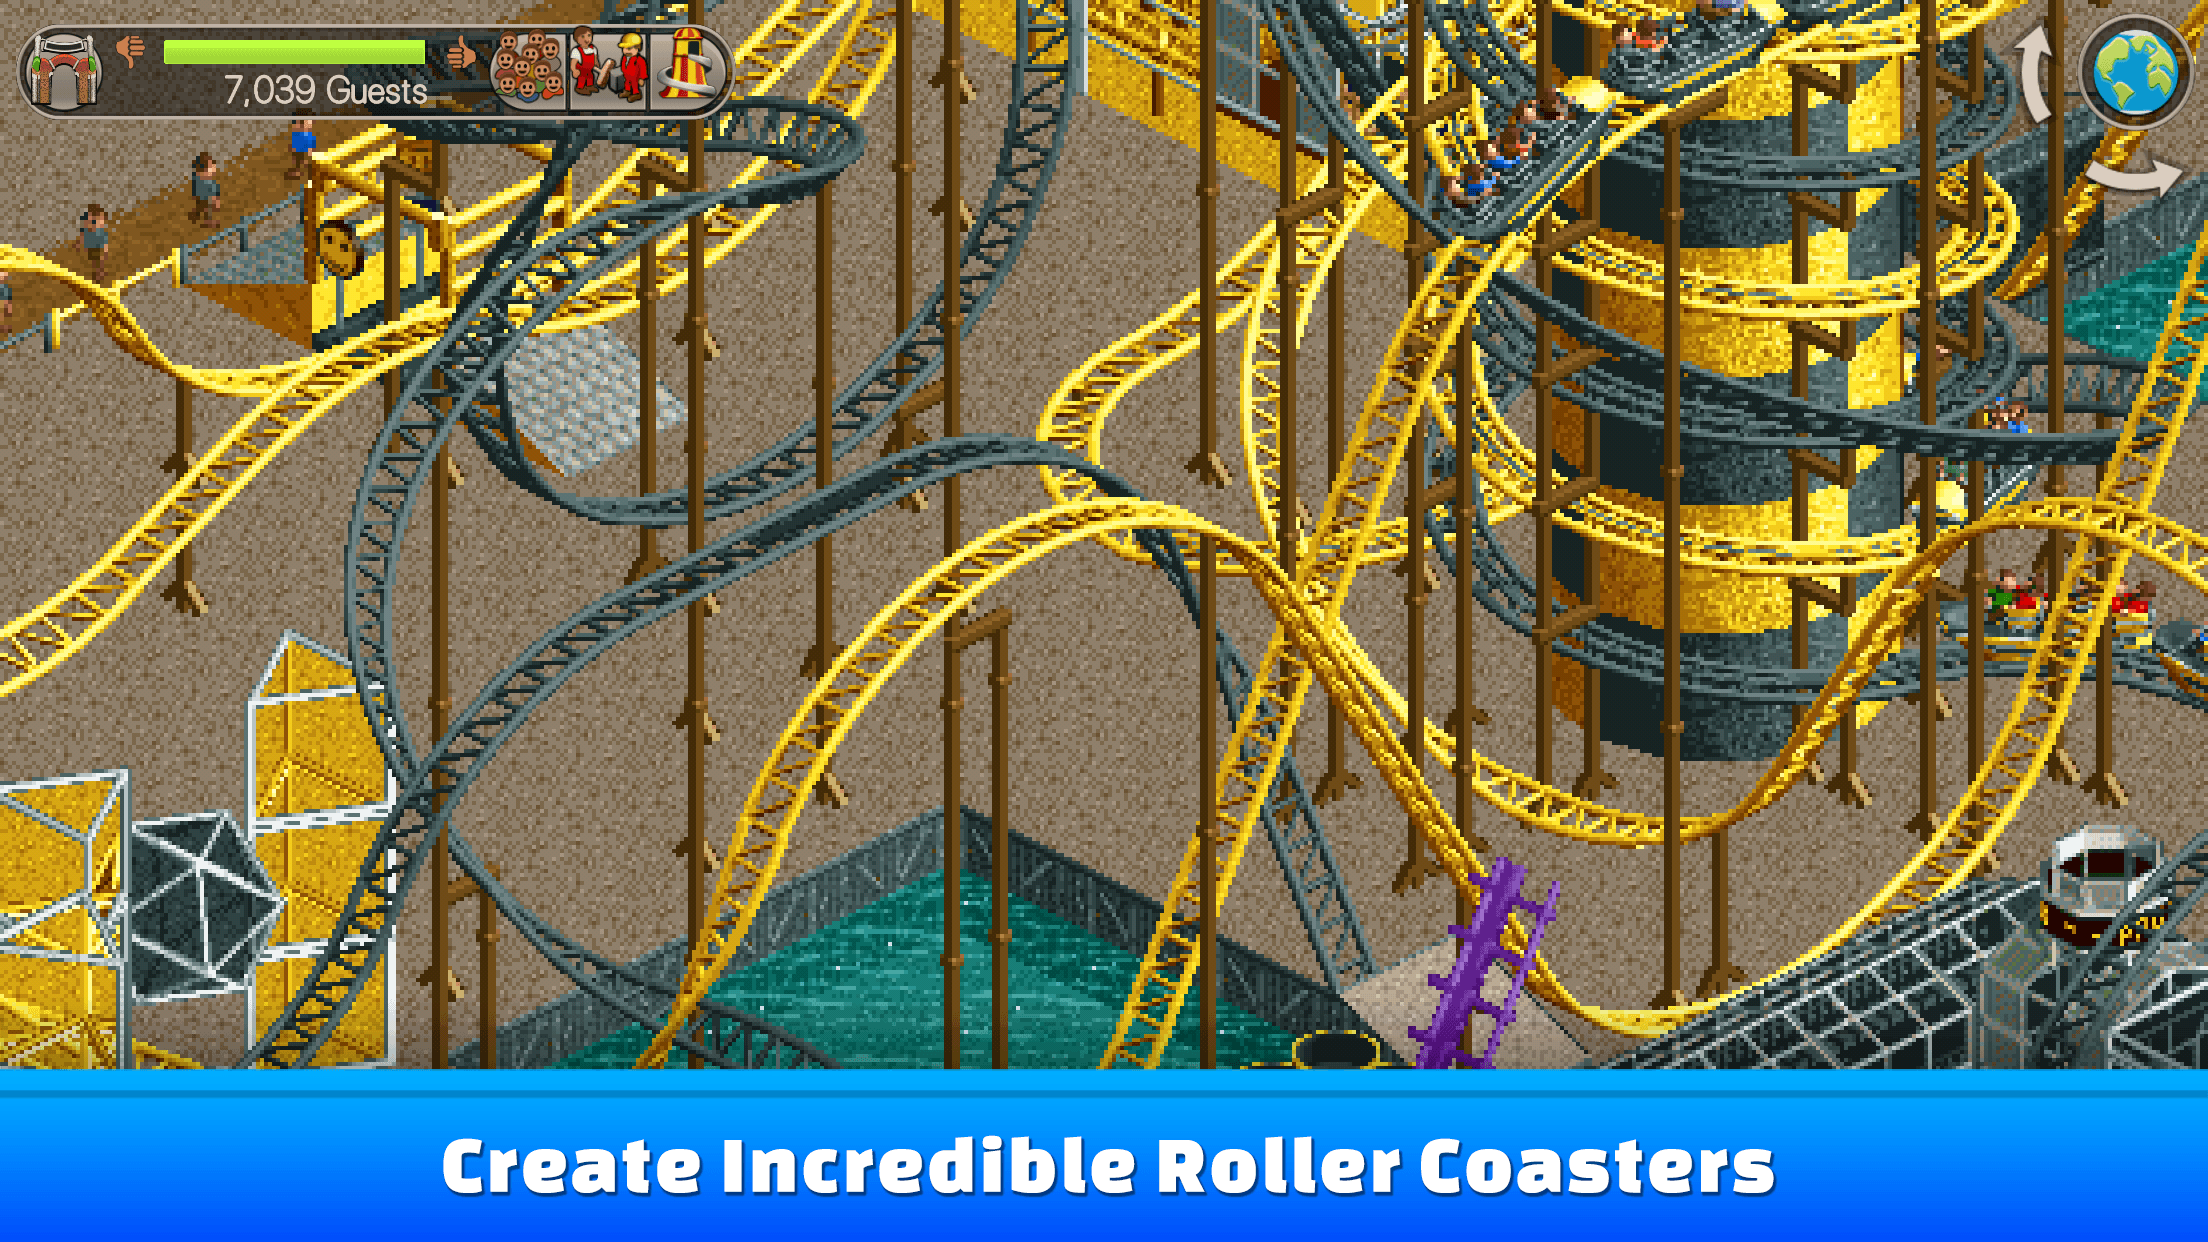 Rollercoaster tycoon 4 mac download free